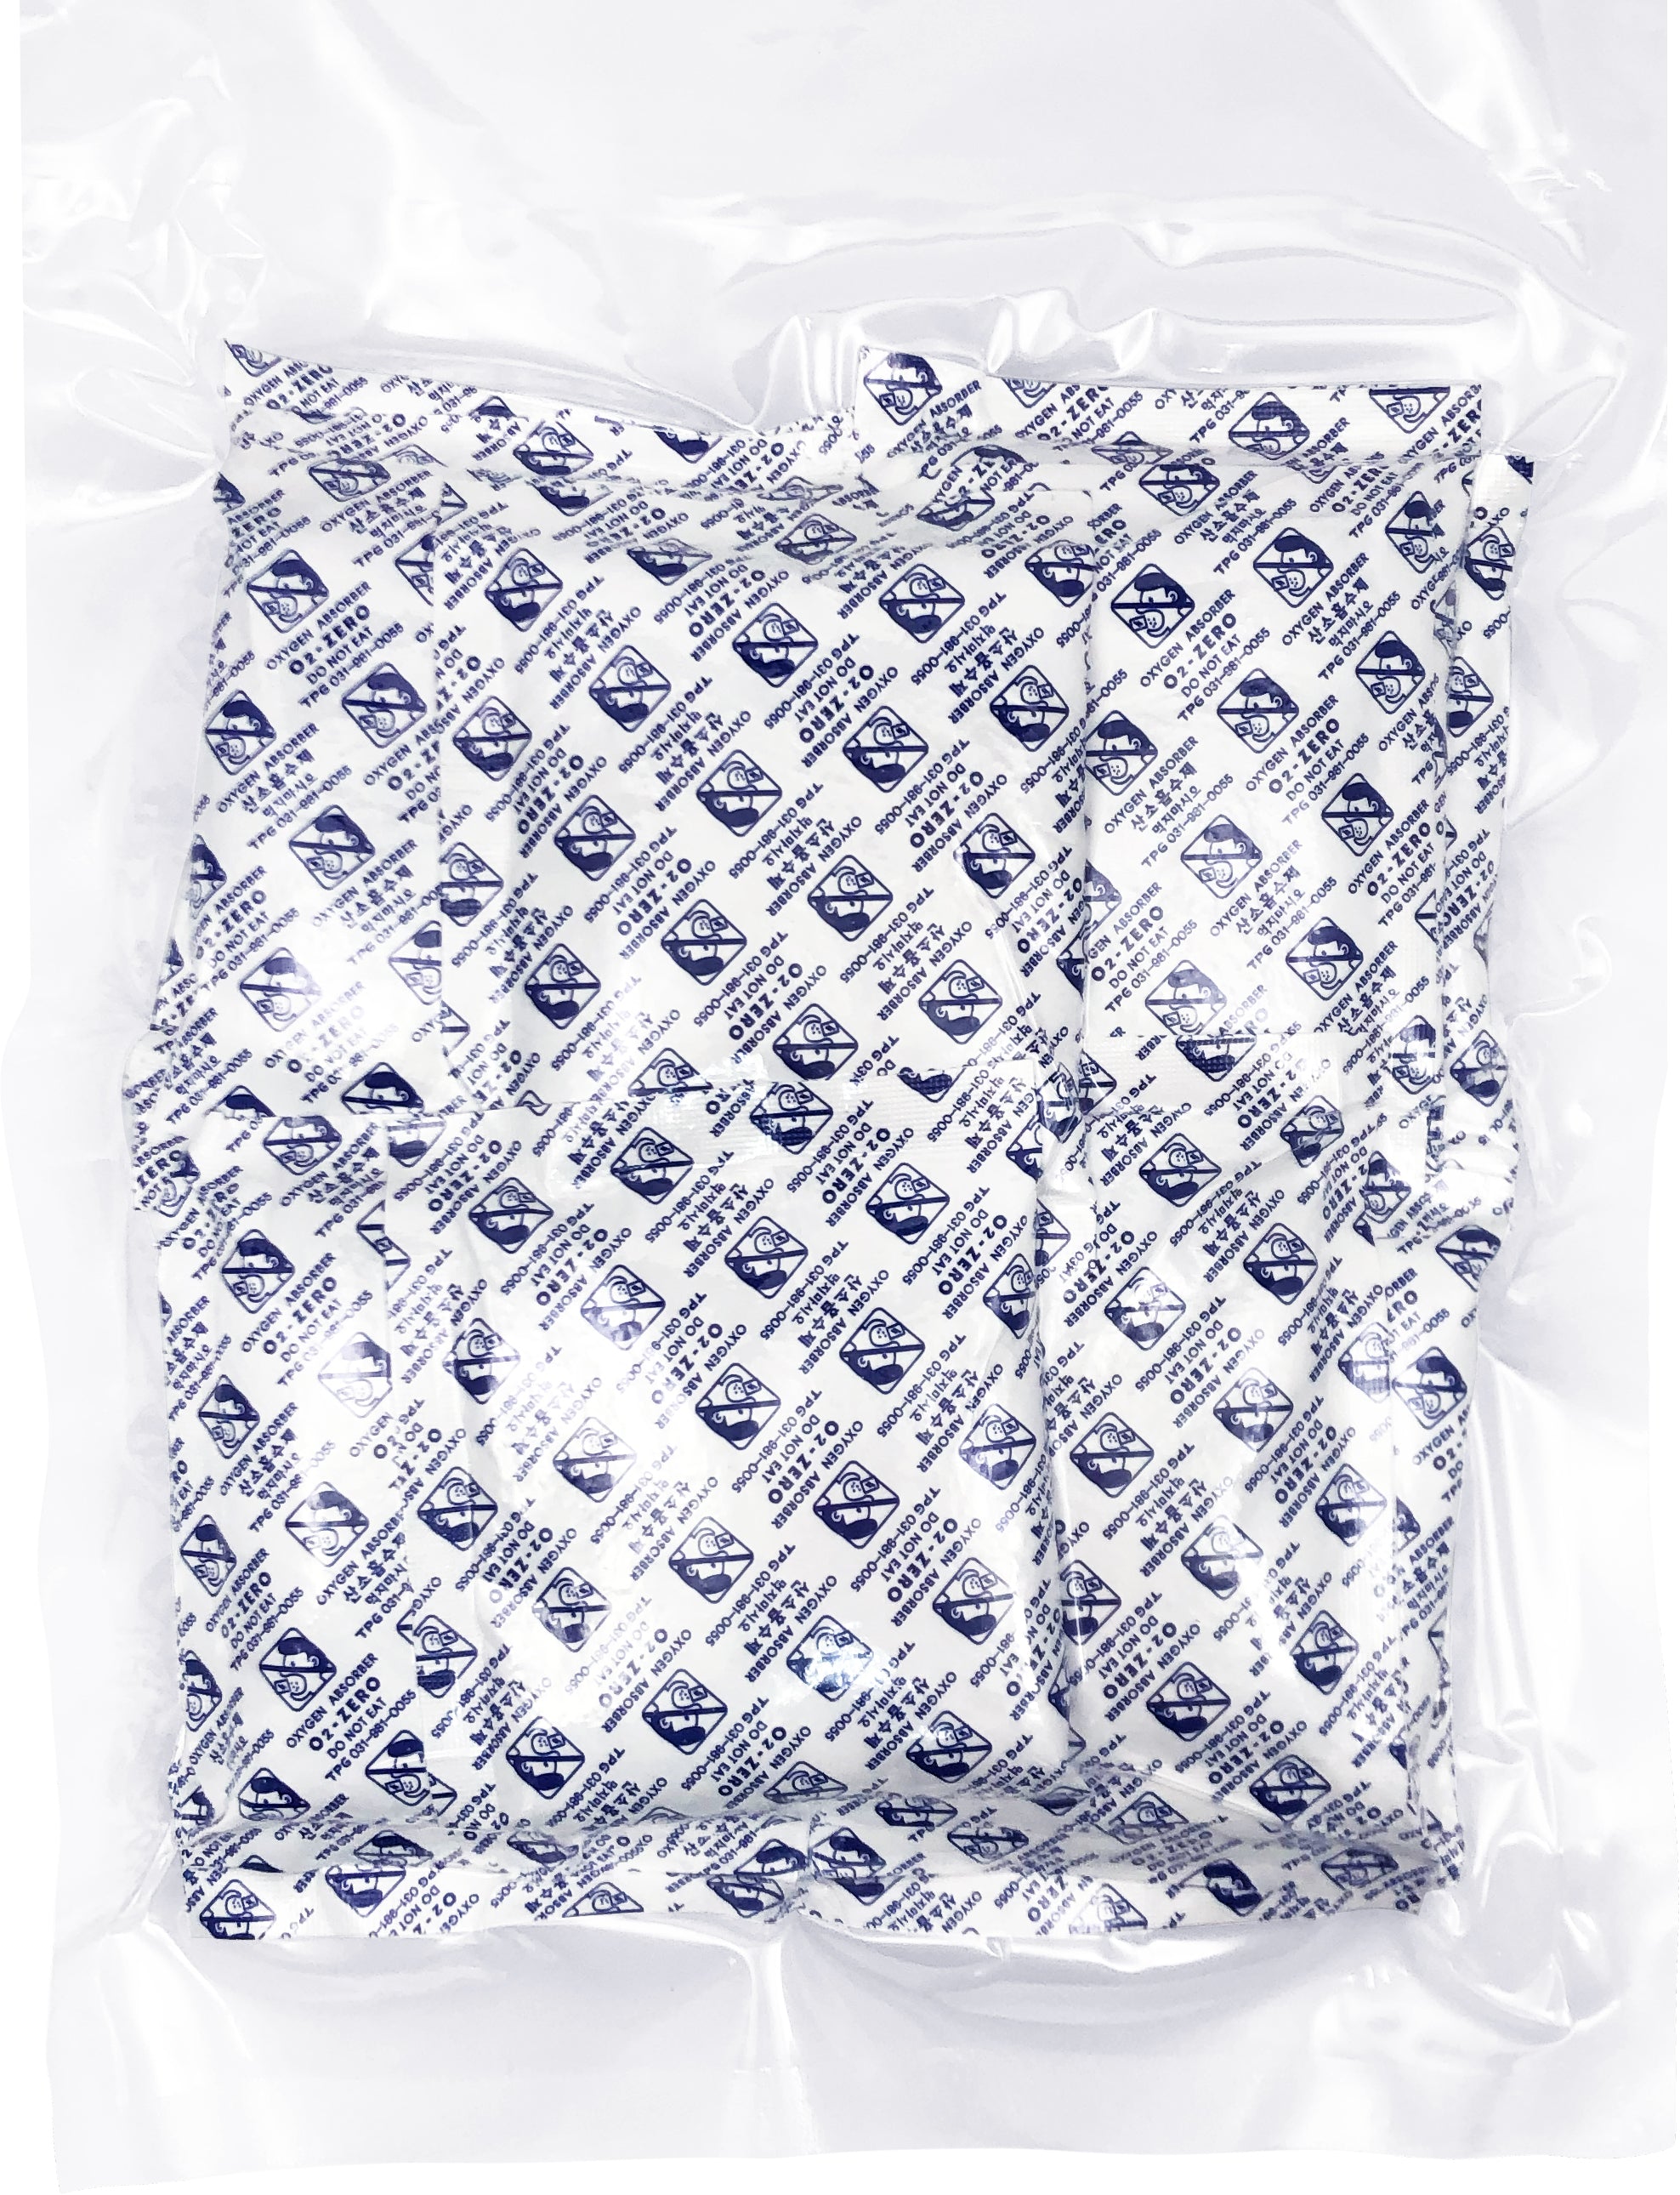 Fresh & Fresh (252 Packs) 2000 CC Premium Oxygen Absorbers(14 Bag of 18 Packets) - ISO 9001 & 14001 Certified Facility Manufactured